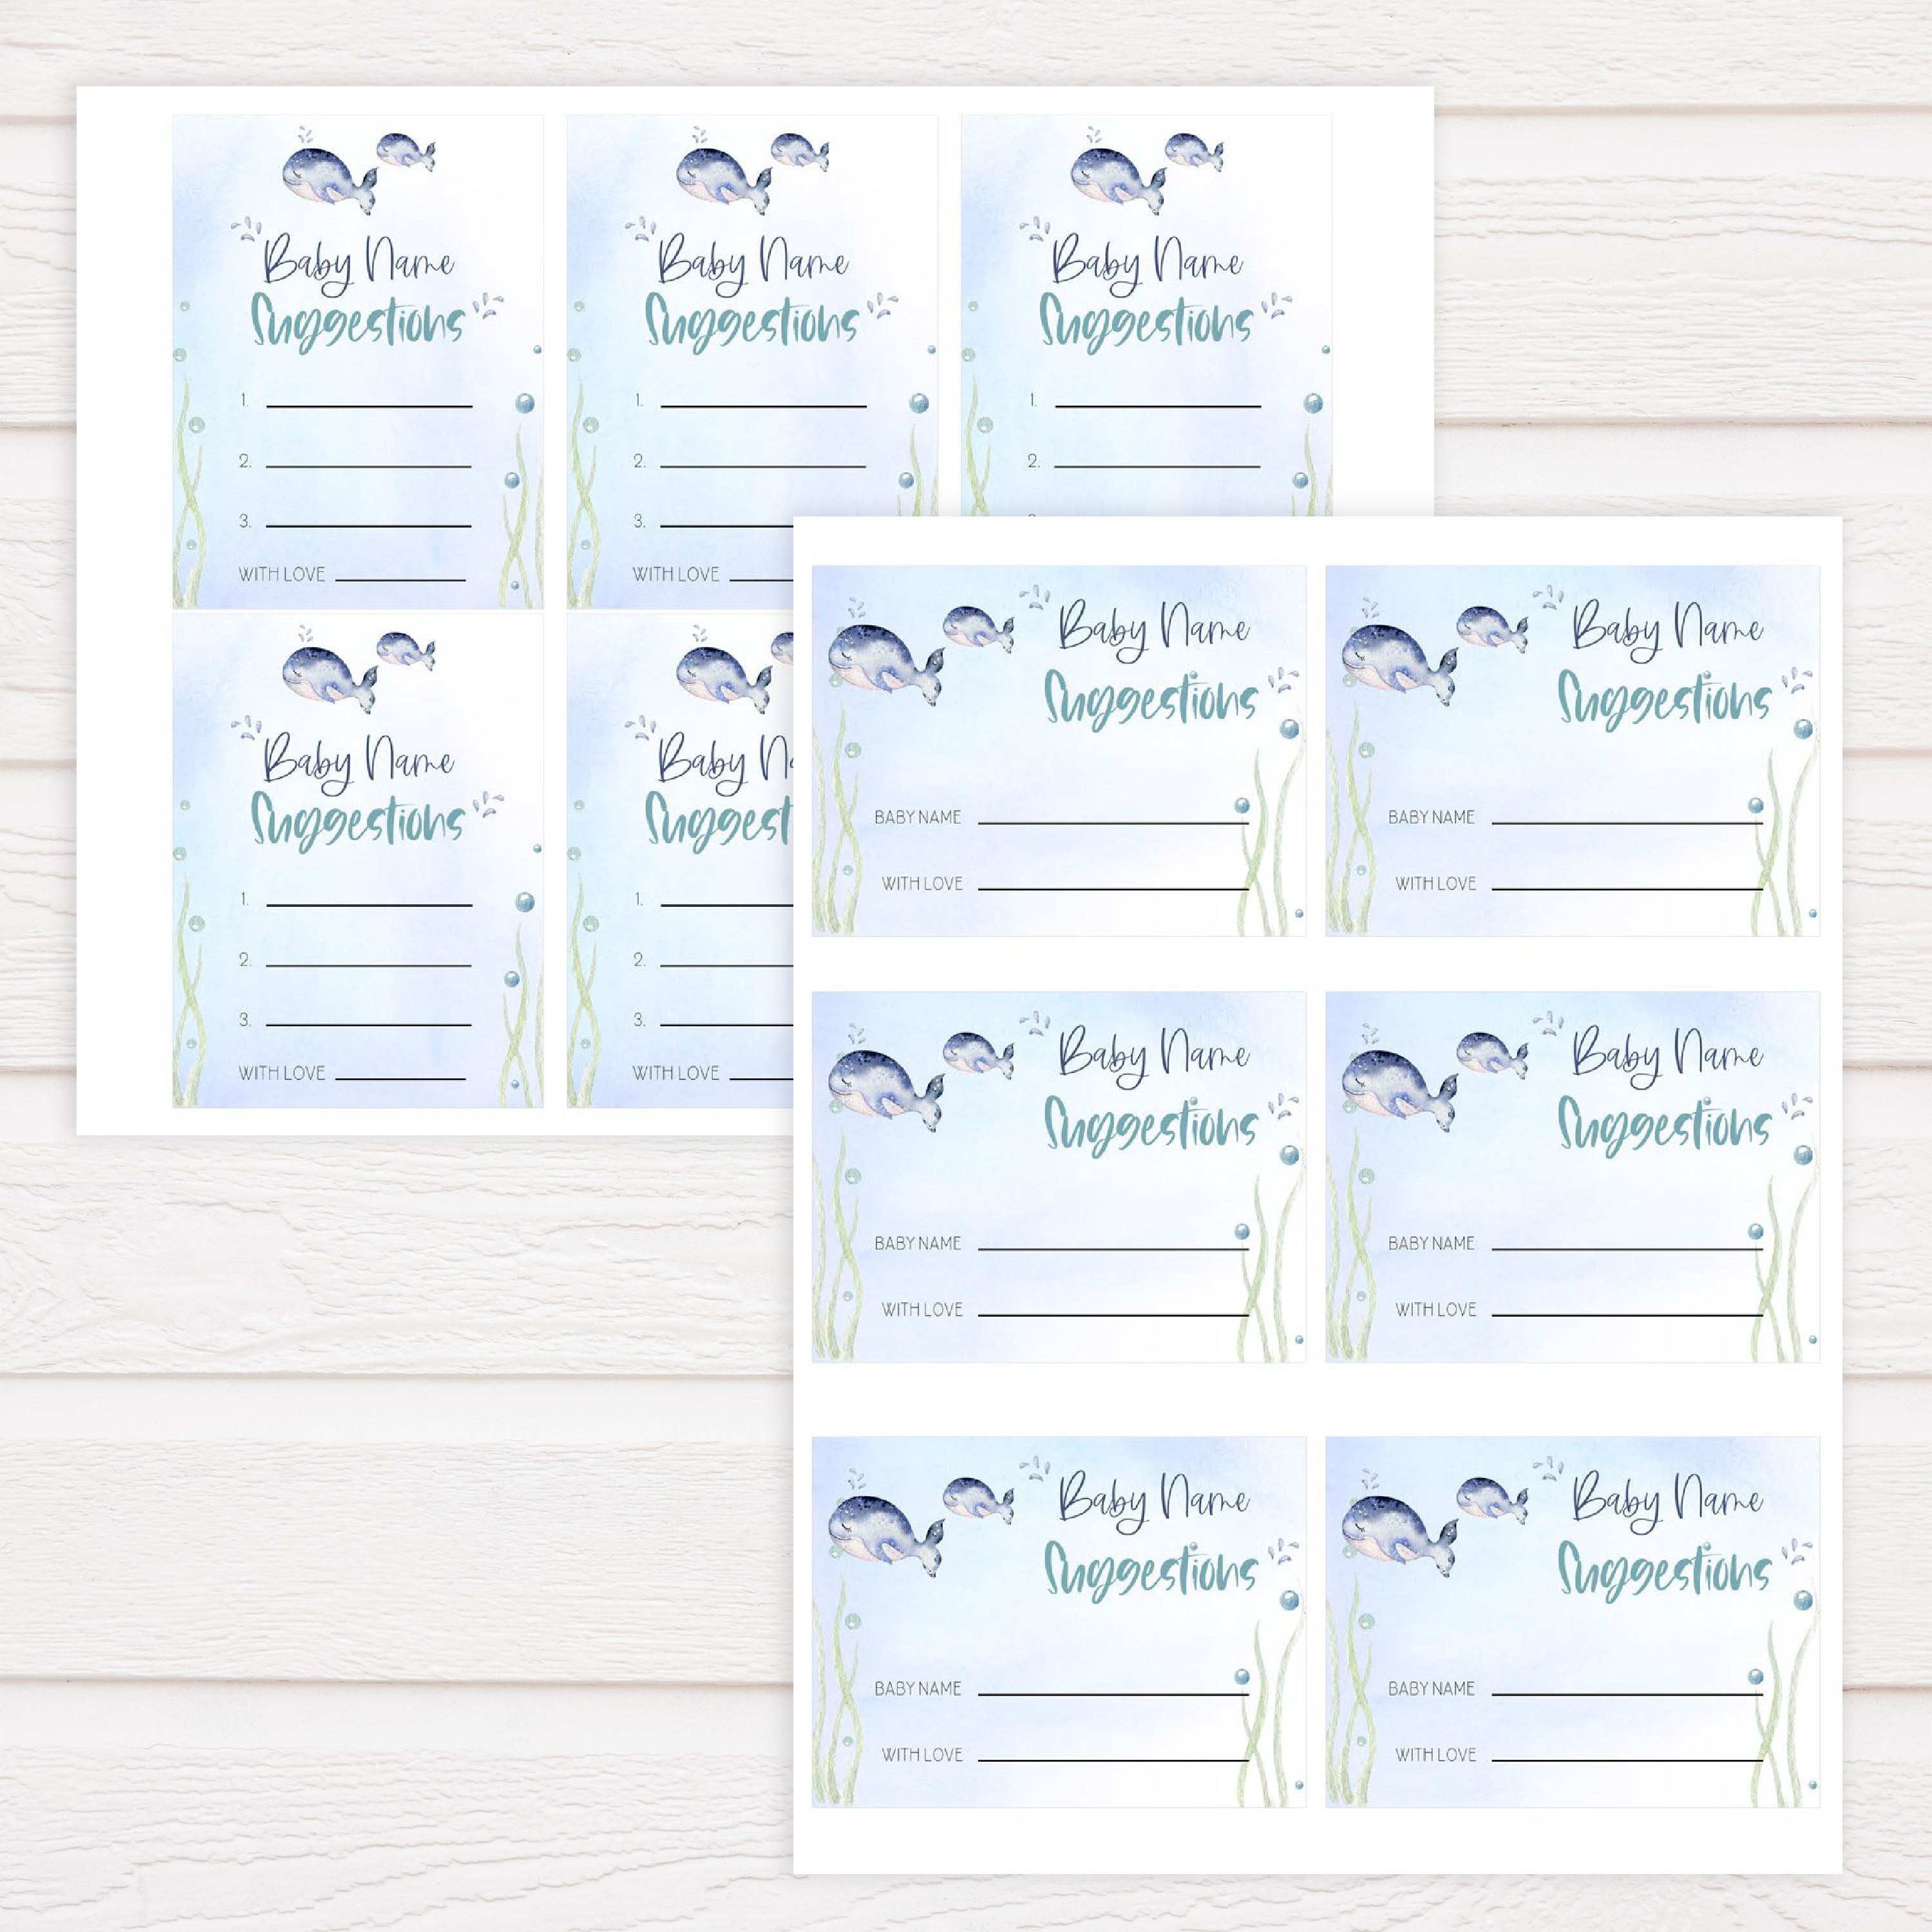 baby name suggestions game, Printable baby shower games, whale baby games, baby shower games, fun baby shower ideas, top baby shower ideas, whale baby shower, baby shower games, fun whale baby shower ideas